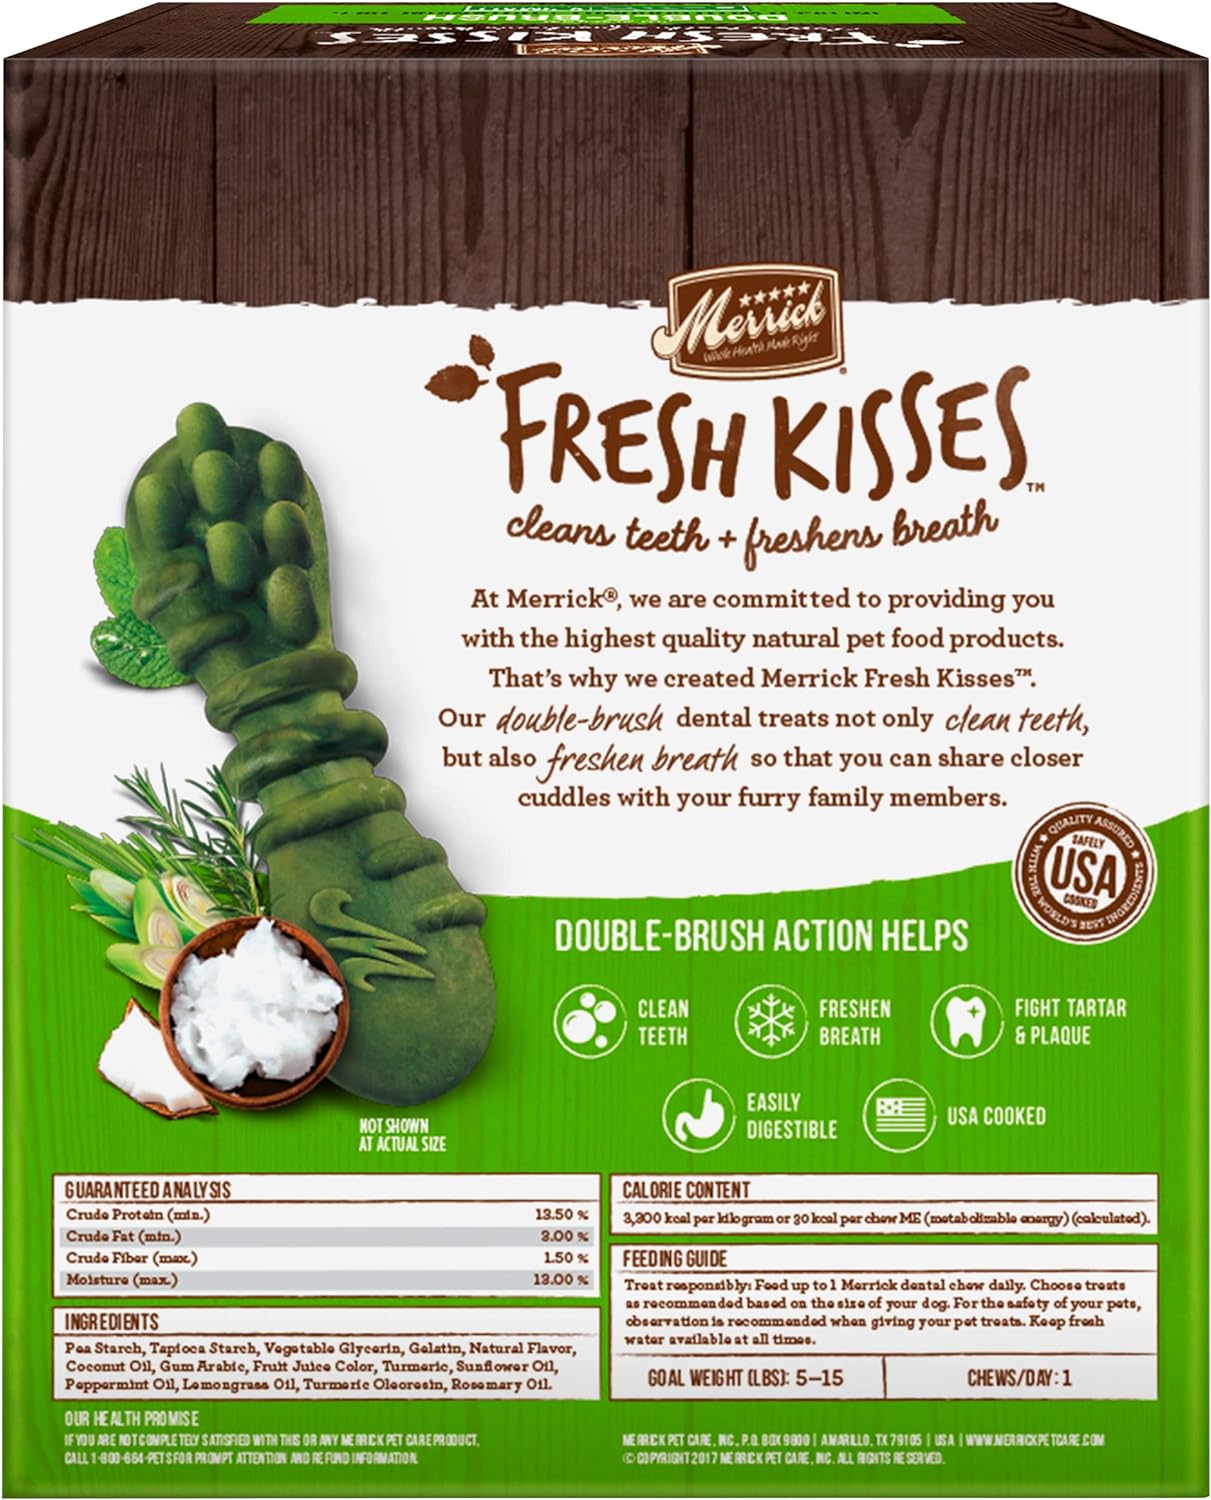 Merrick Fresh Kisses Double-Brush Dental Dog Treats, Infused with Coconut & Botanical Oils, Cleans & Freshens Breath for X-Small Dogs, 78 Dental Dog Treats\/Pack (Pack of 2)